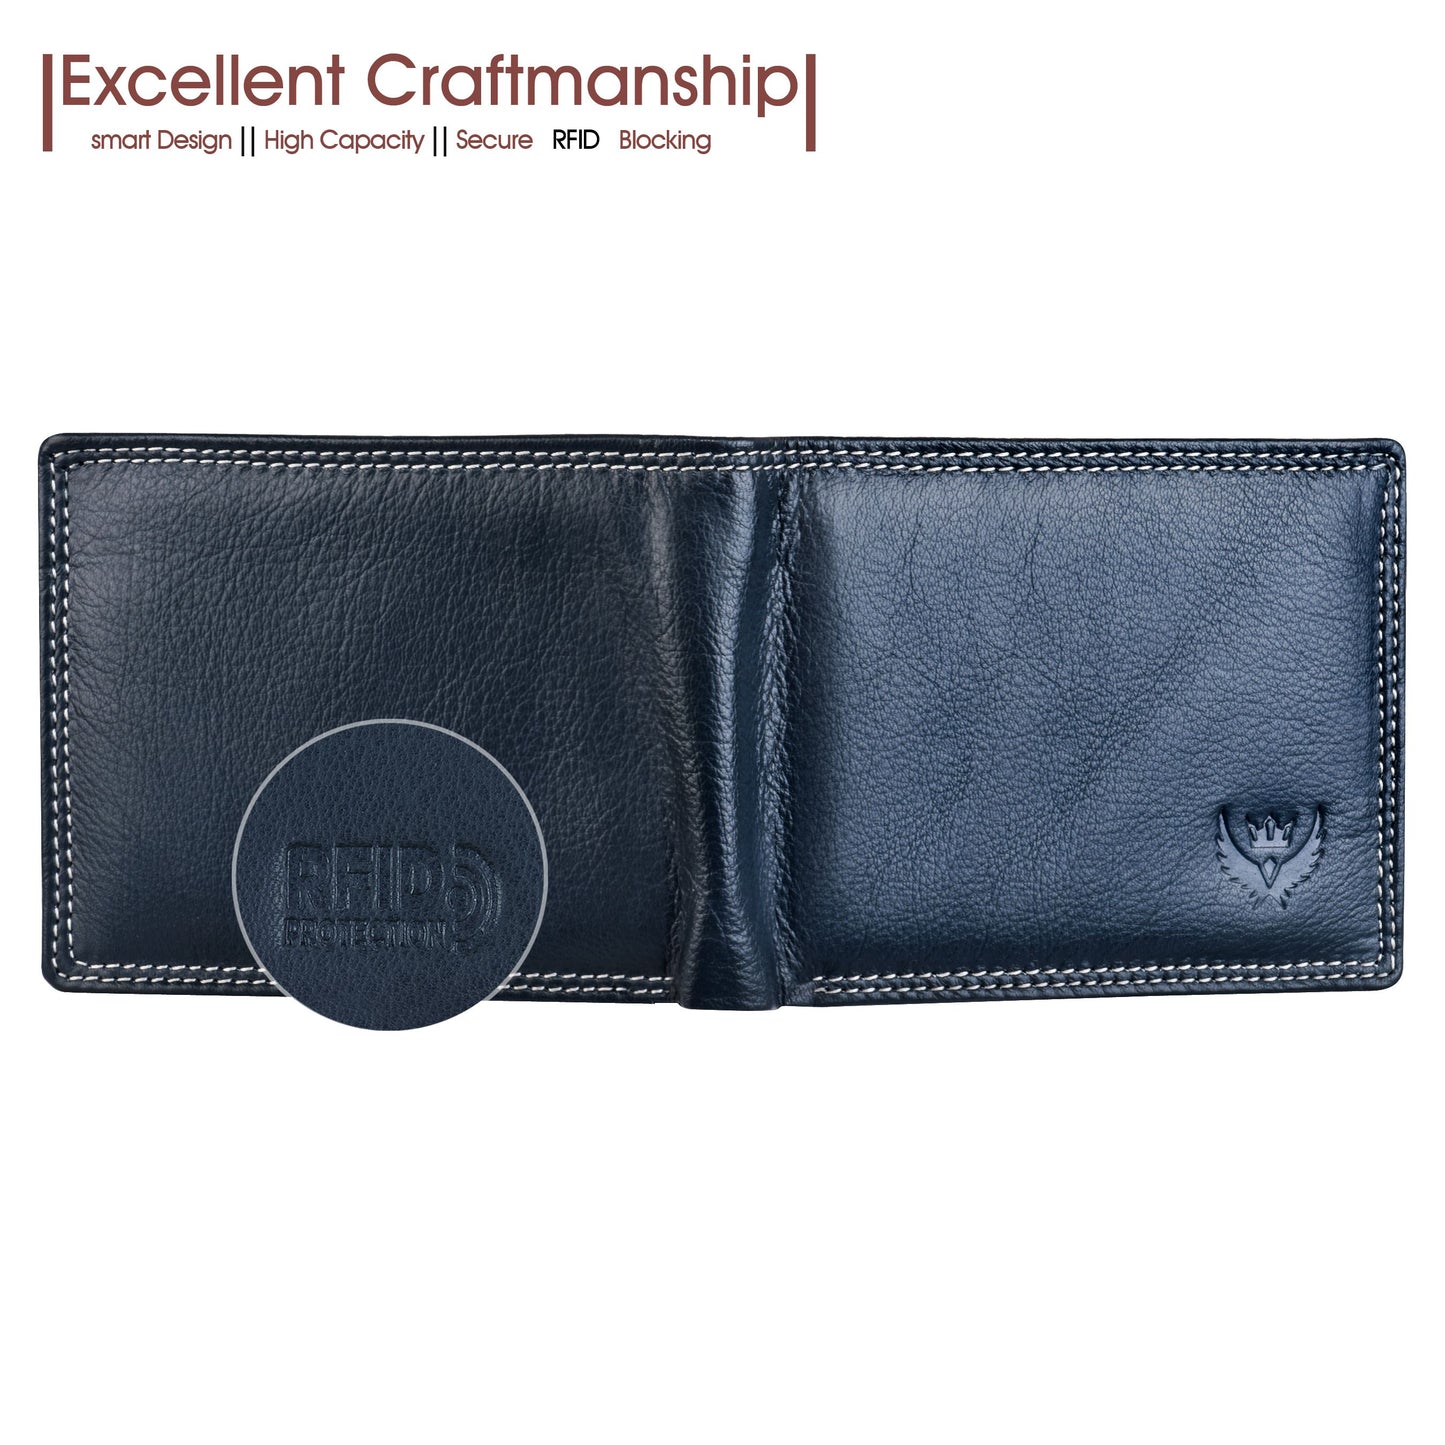 Bi-Fold Premium Blue RFID Blocking Grain Leather Wallet for Men with Double ID Card Flap, 9 Credit Card Pockets & Coin Pocket Feature